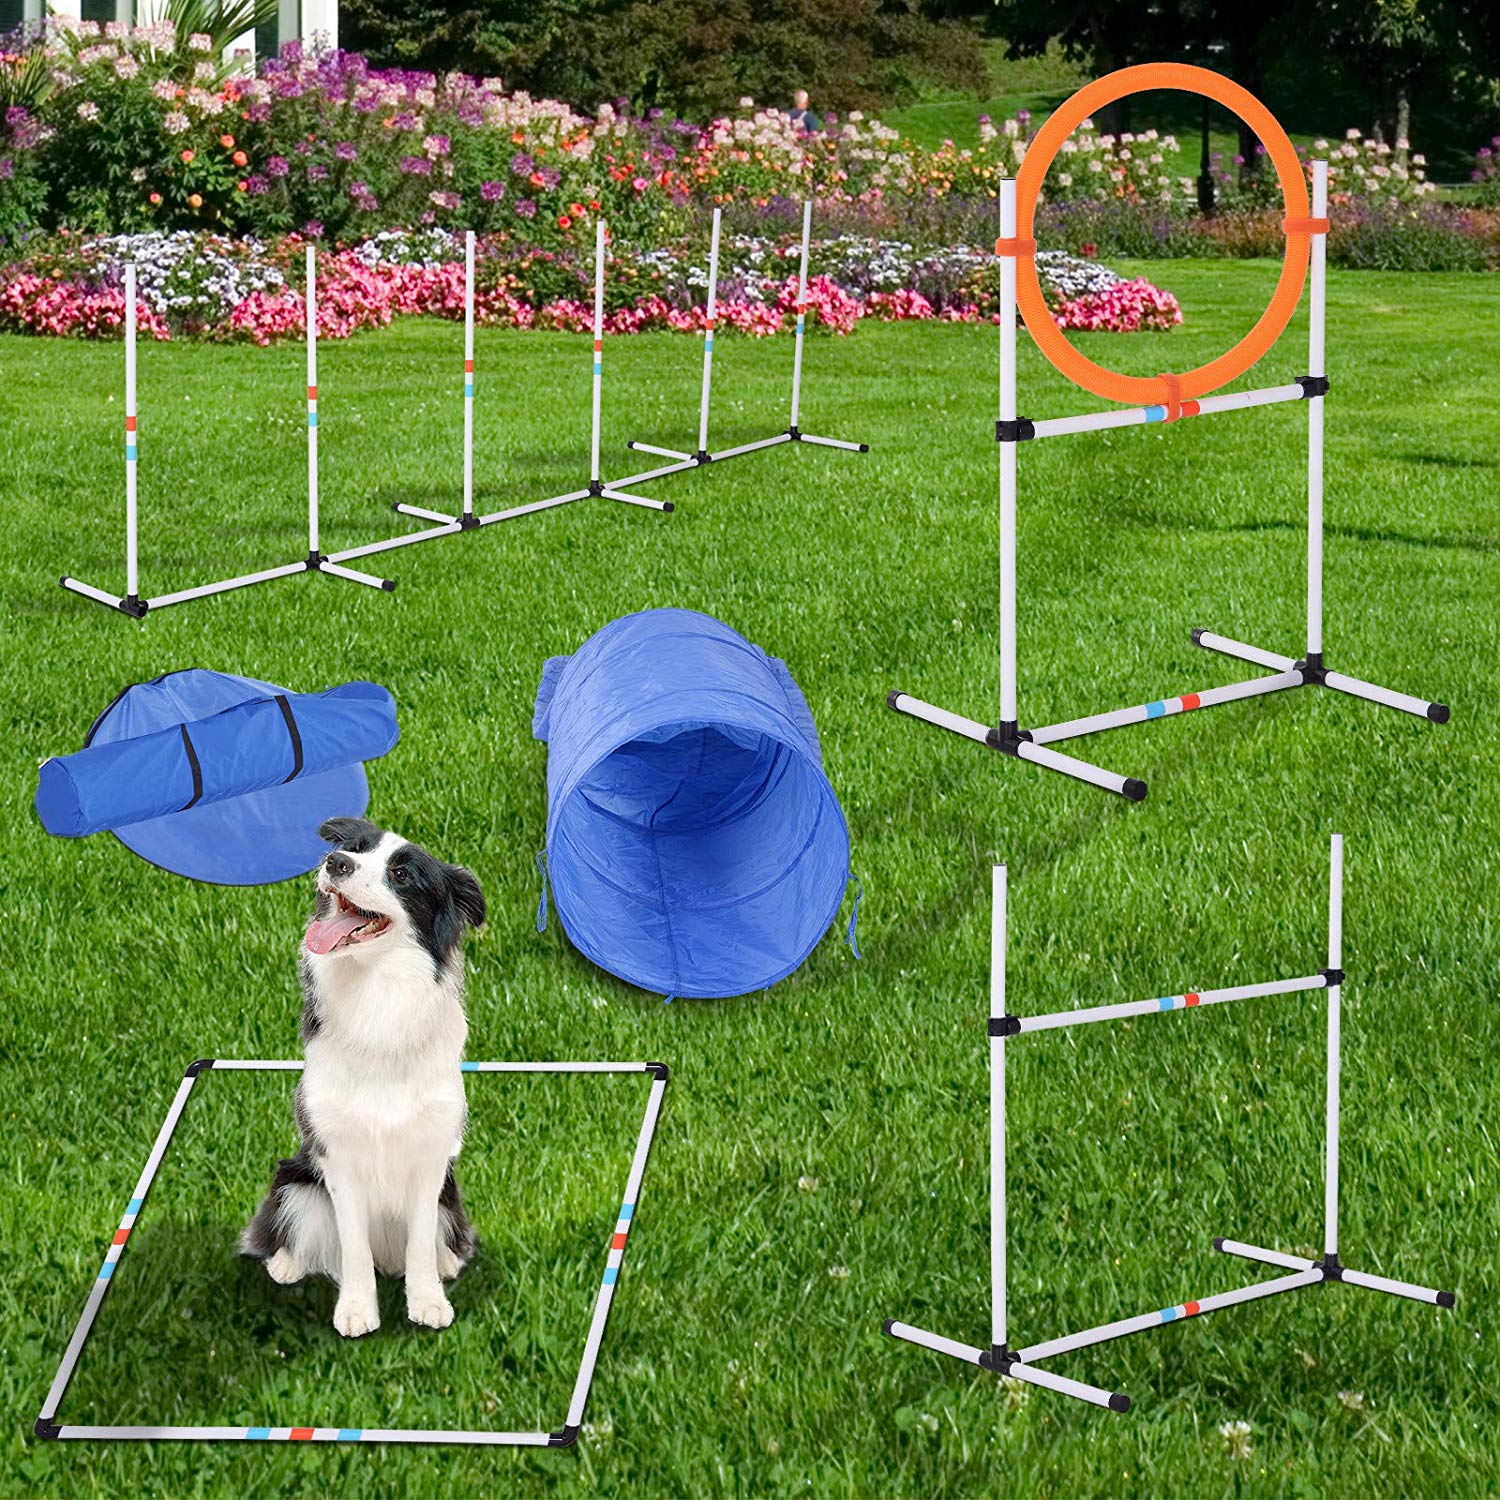 Whistle 3Pcs Flying Disc LUBORN Dog Agility Training Equipment Dog Obstacle Course for Backyard Jumping Ring 8 Pcs Weave Poles Pause Box High Jumps Starter Agility Set for Dogs 